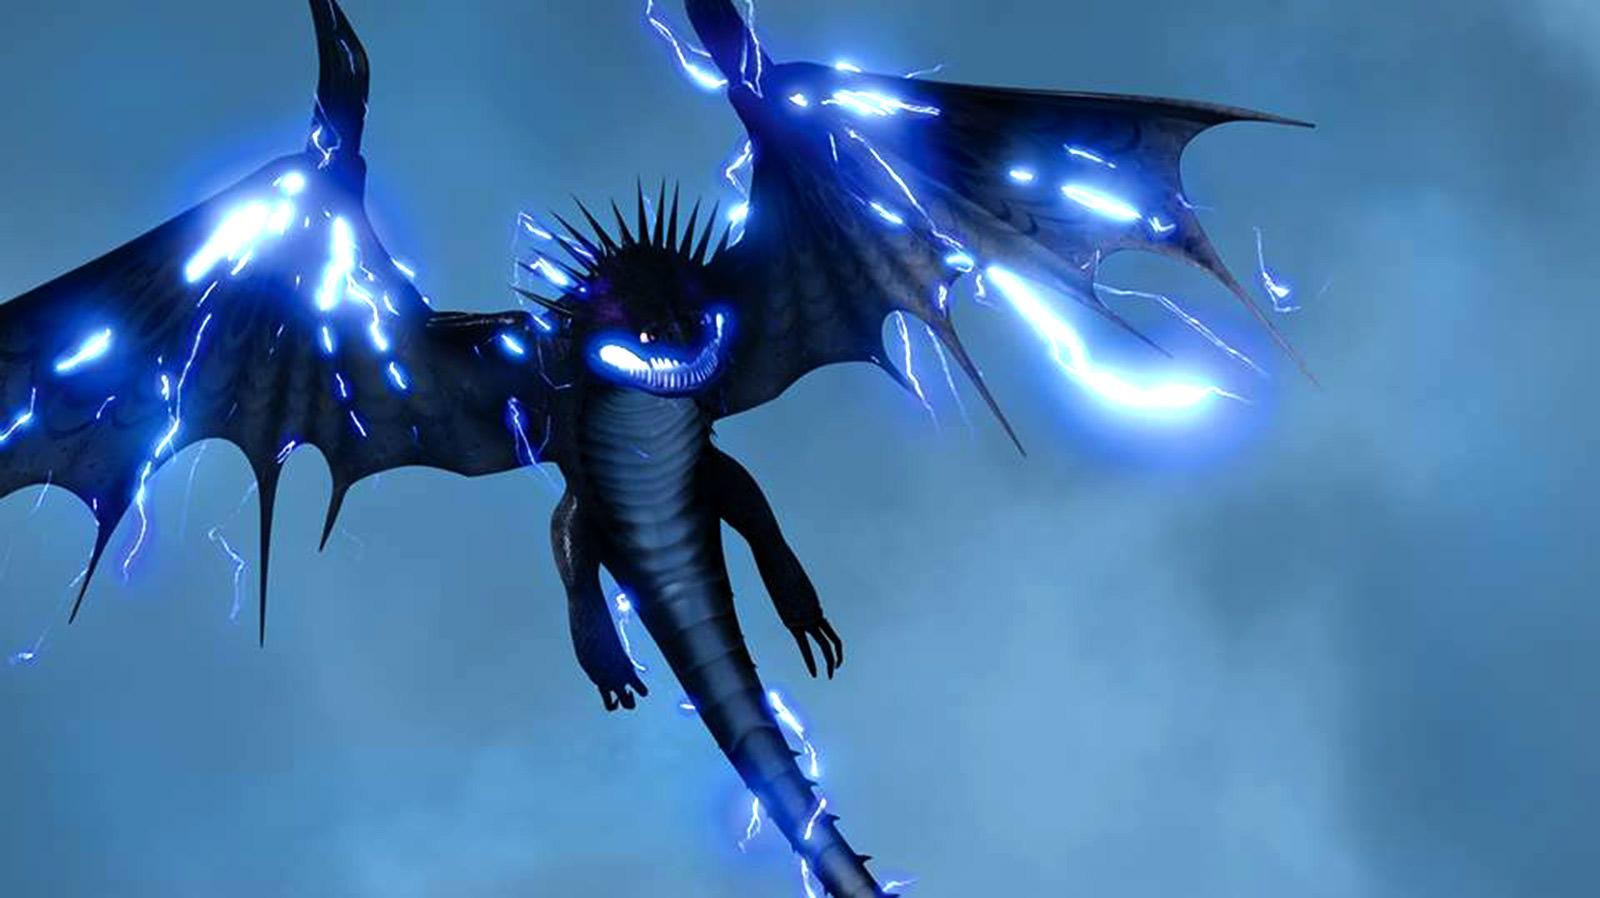 How to Train Your Dragon 2 Picture, Wallpaper and Desktop Background